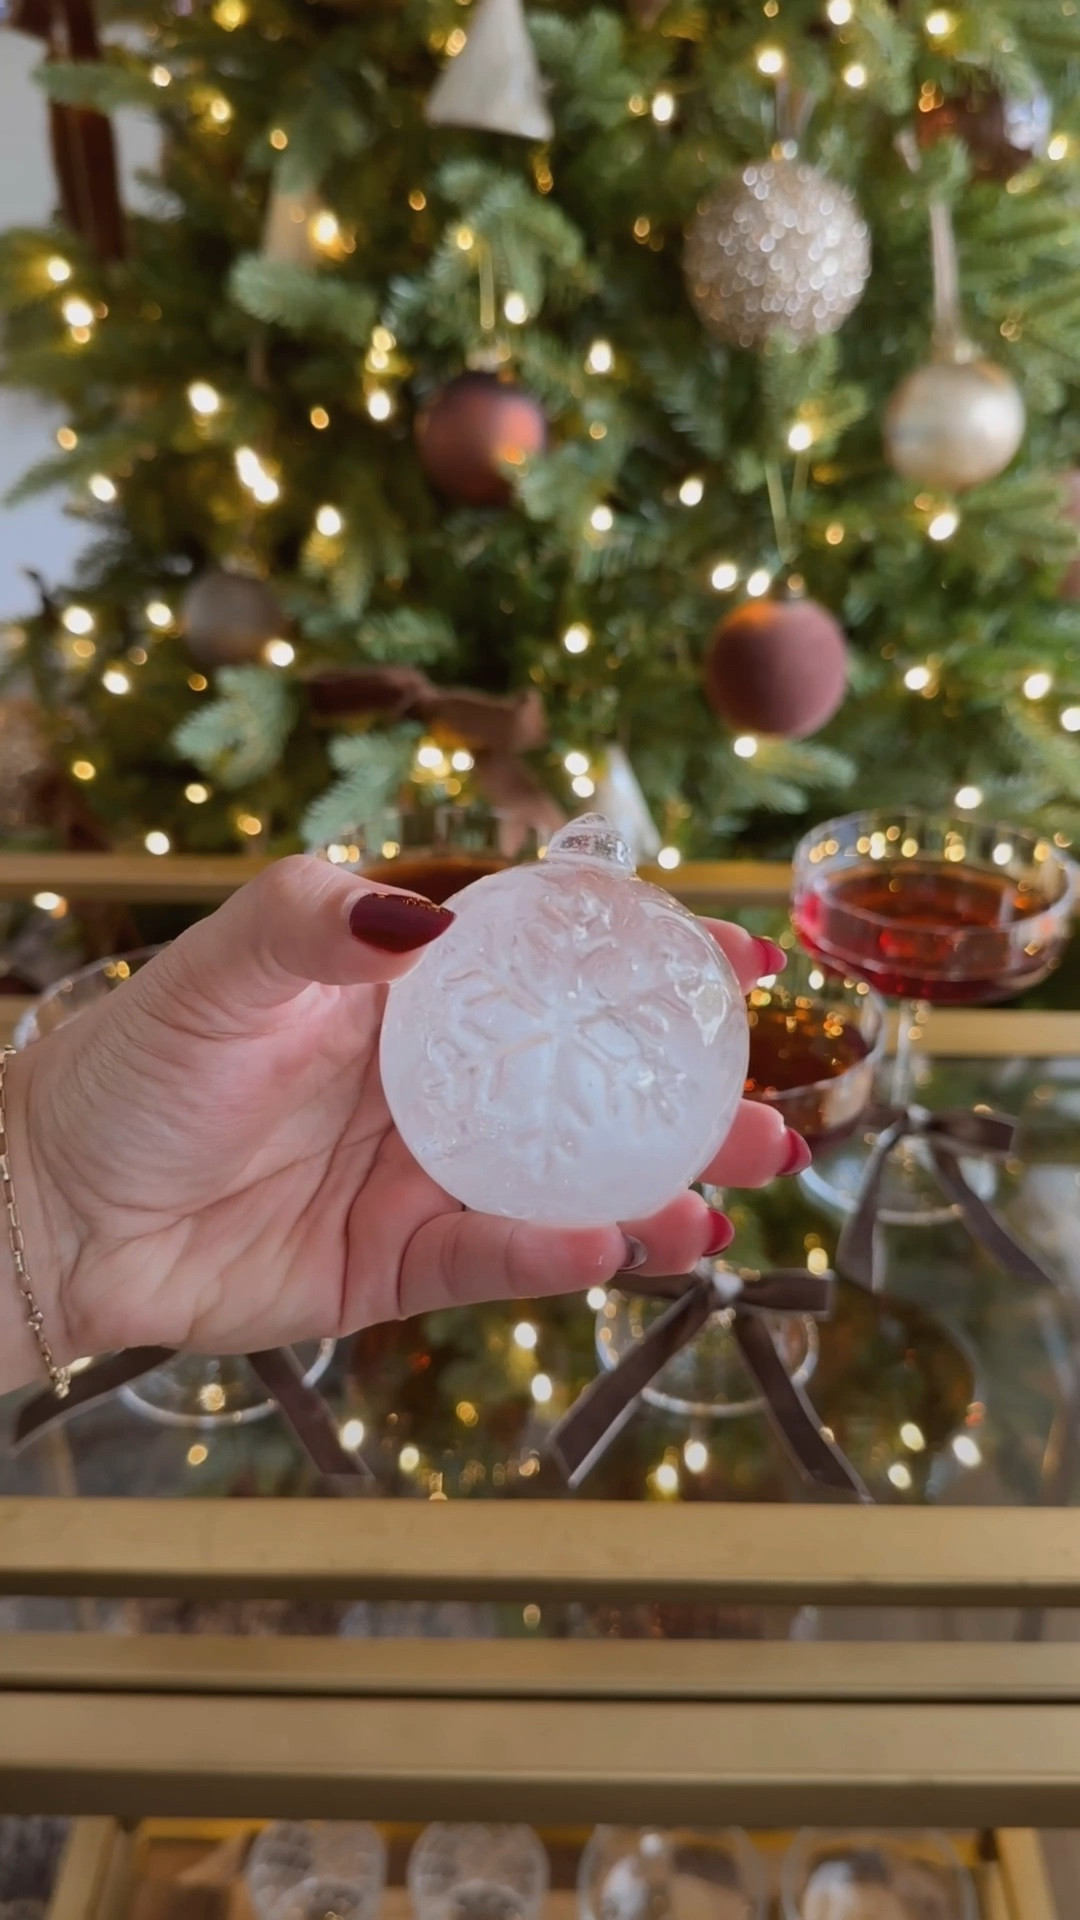  Tovolo Christmas Ornament Ice Molds, Set of 4, for